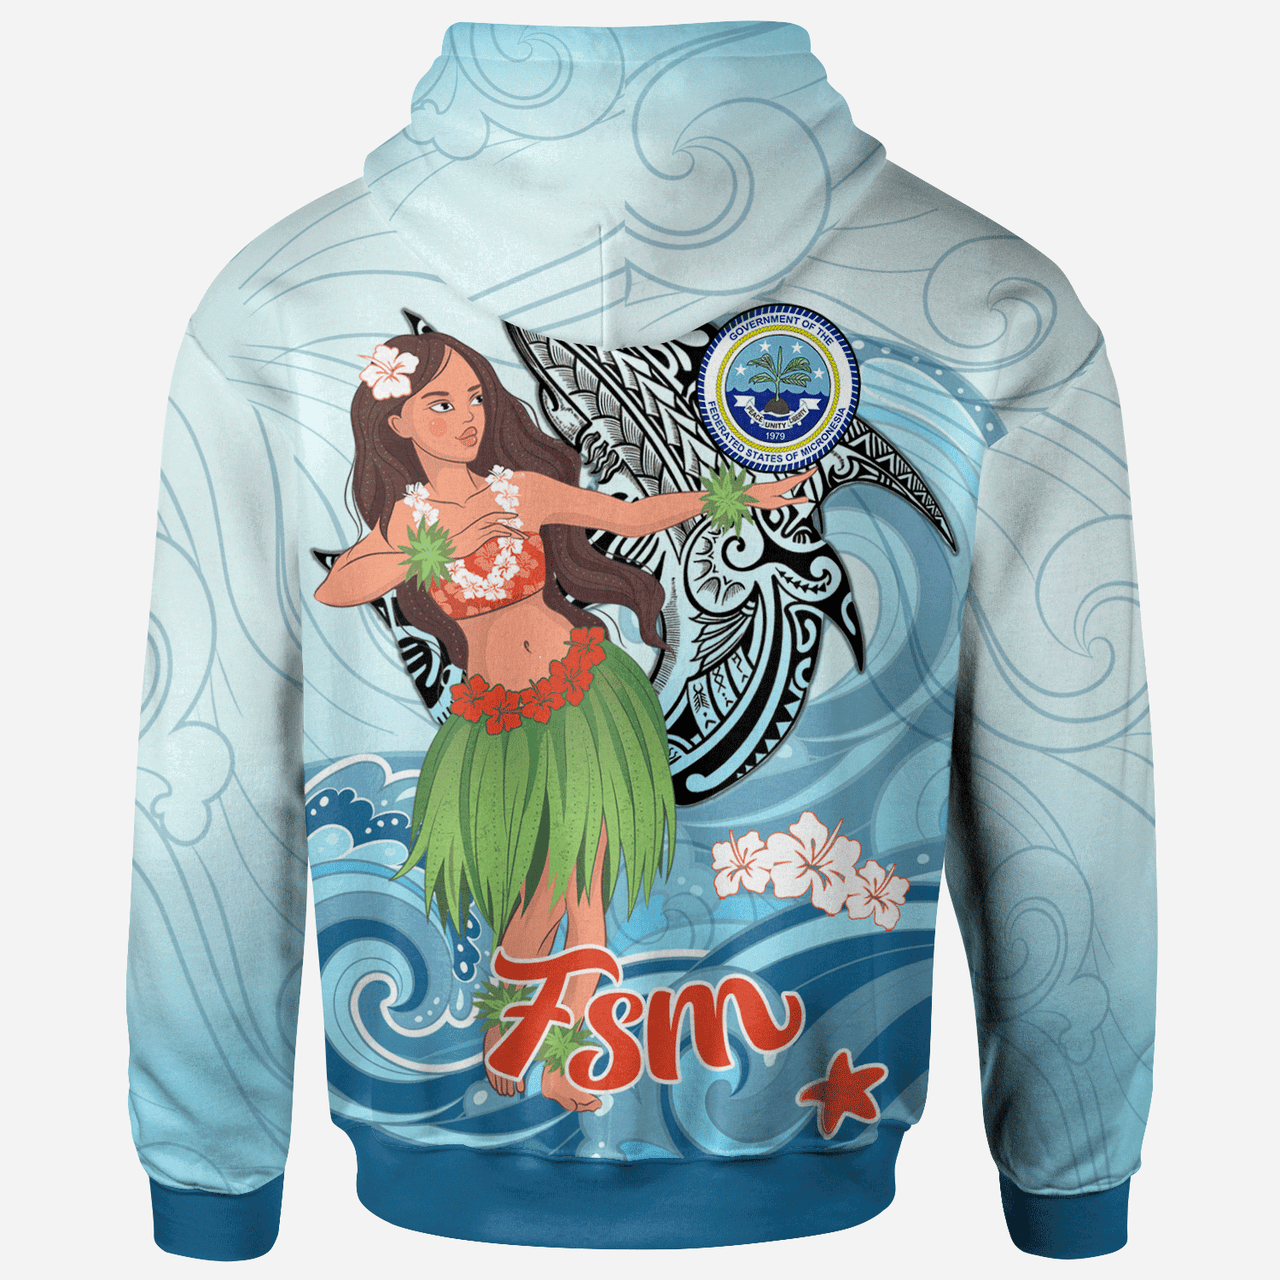 Federated States of Micronesia Hoodie - Polynesian Girls With Shark